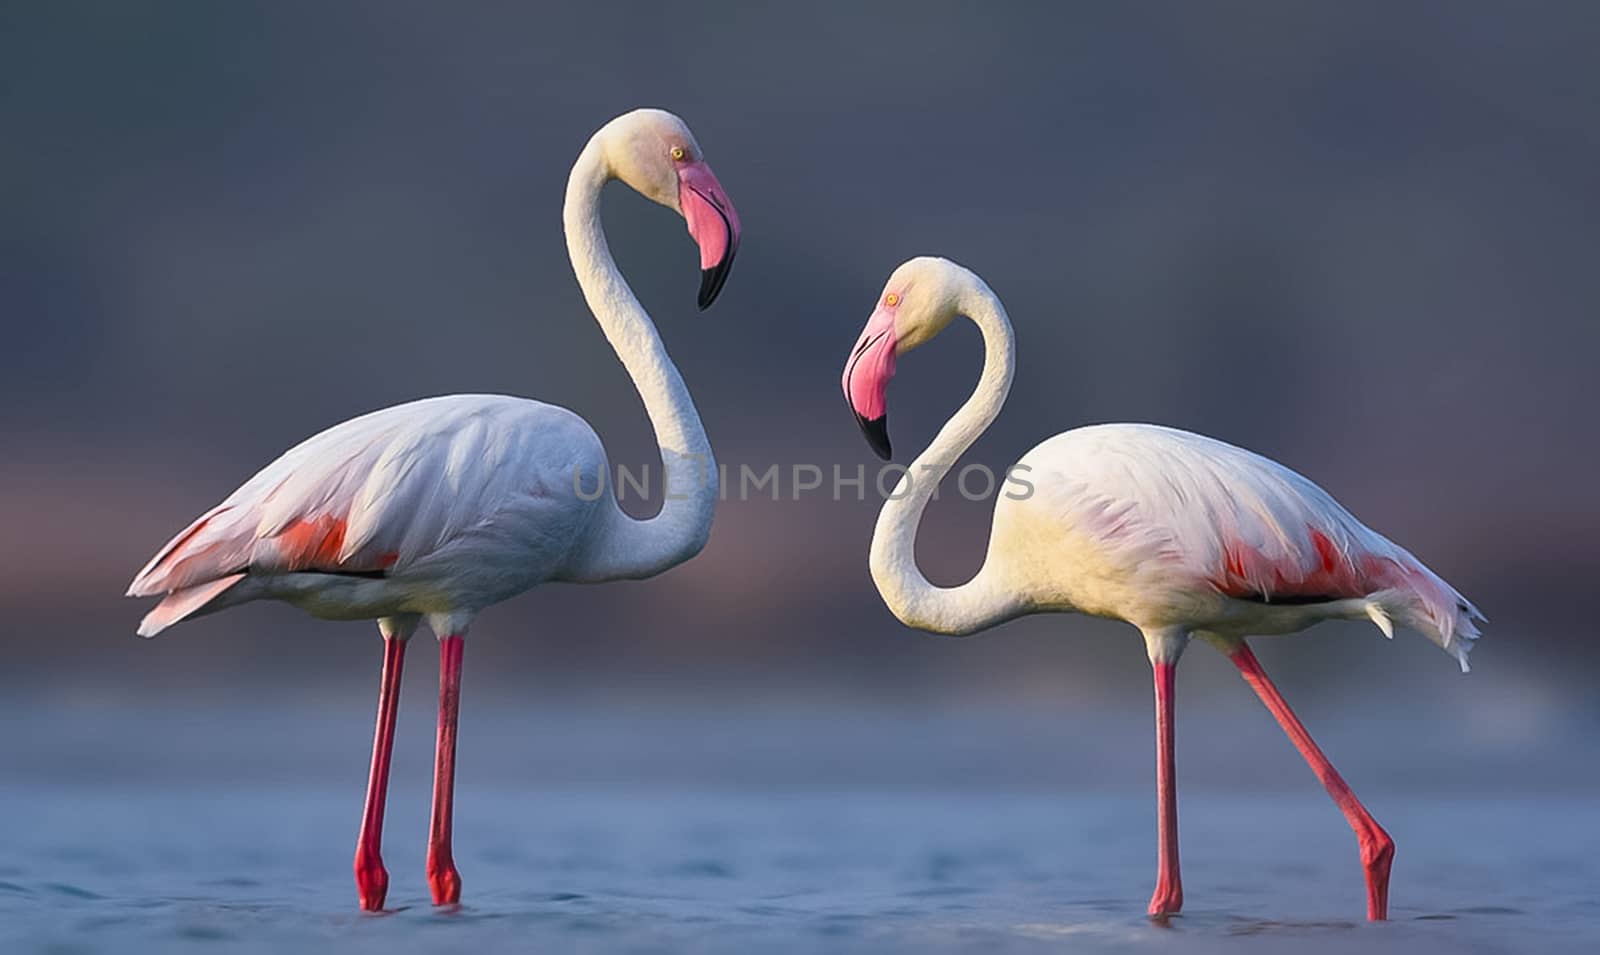 Greater flamingo bird pair standing together in lake by rkbalaji